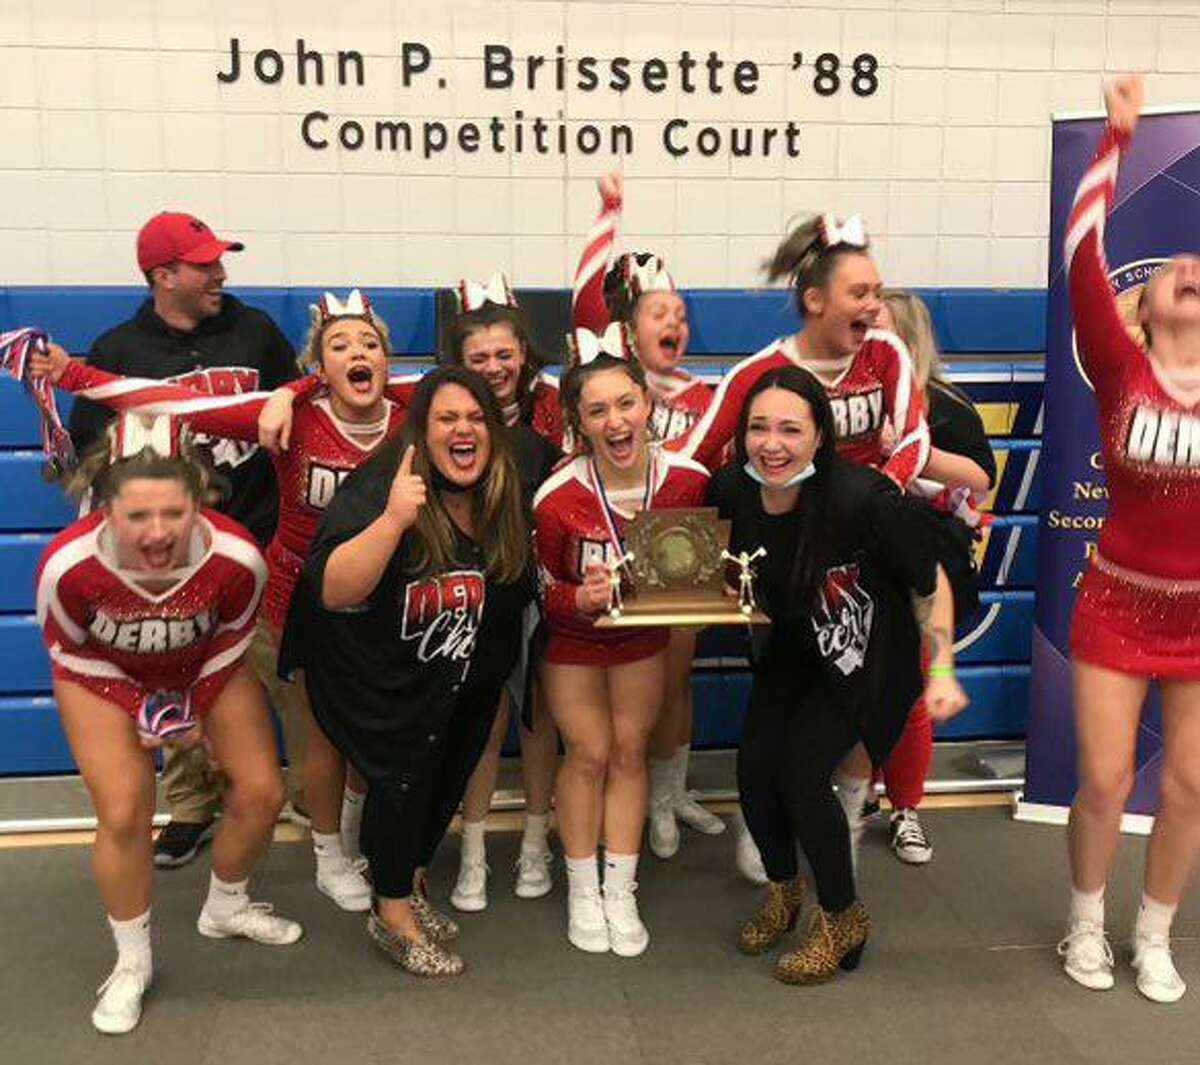 The Derby High School cheerleading team celebrates after winning the Regional New England Spirit Championship Division 4 title on March 19, 2022 at Worcester State University in Worcester, Mass.